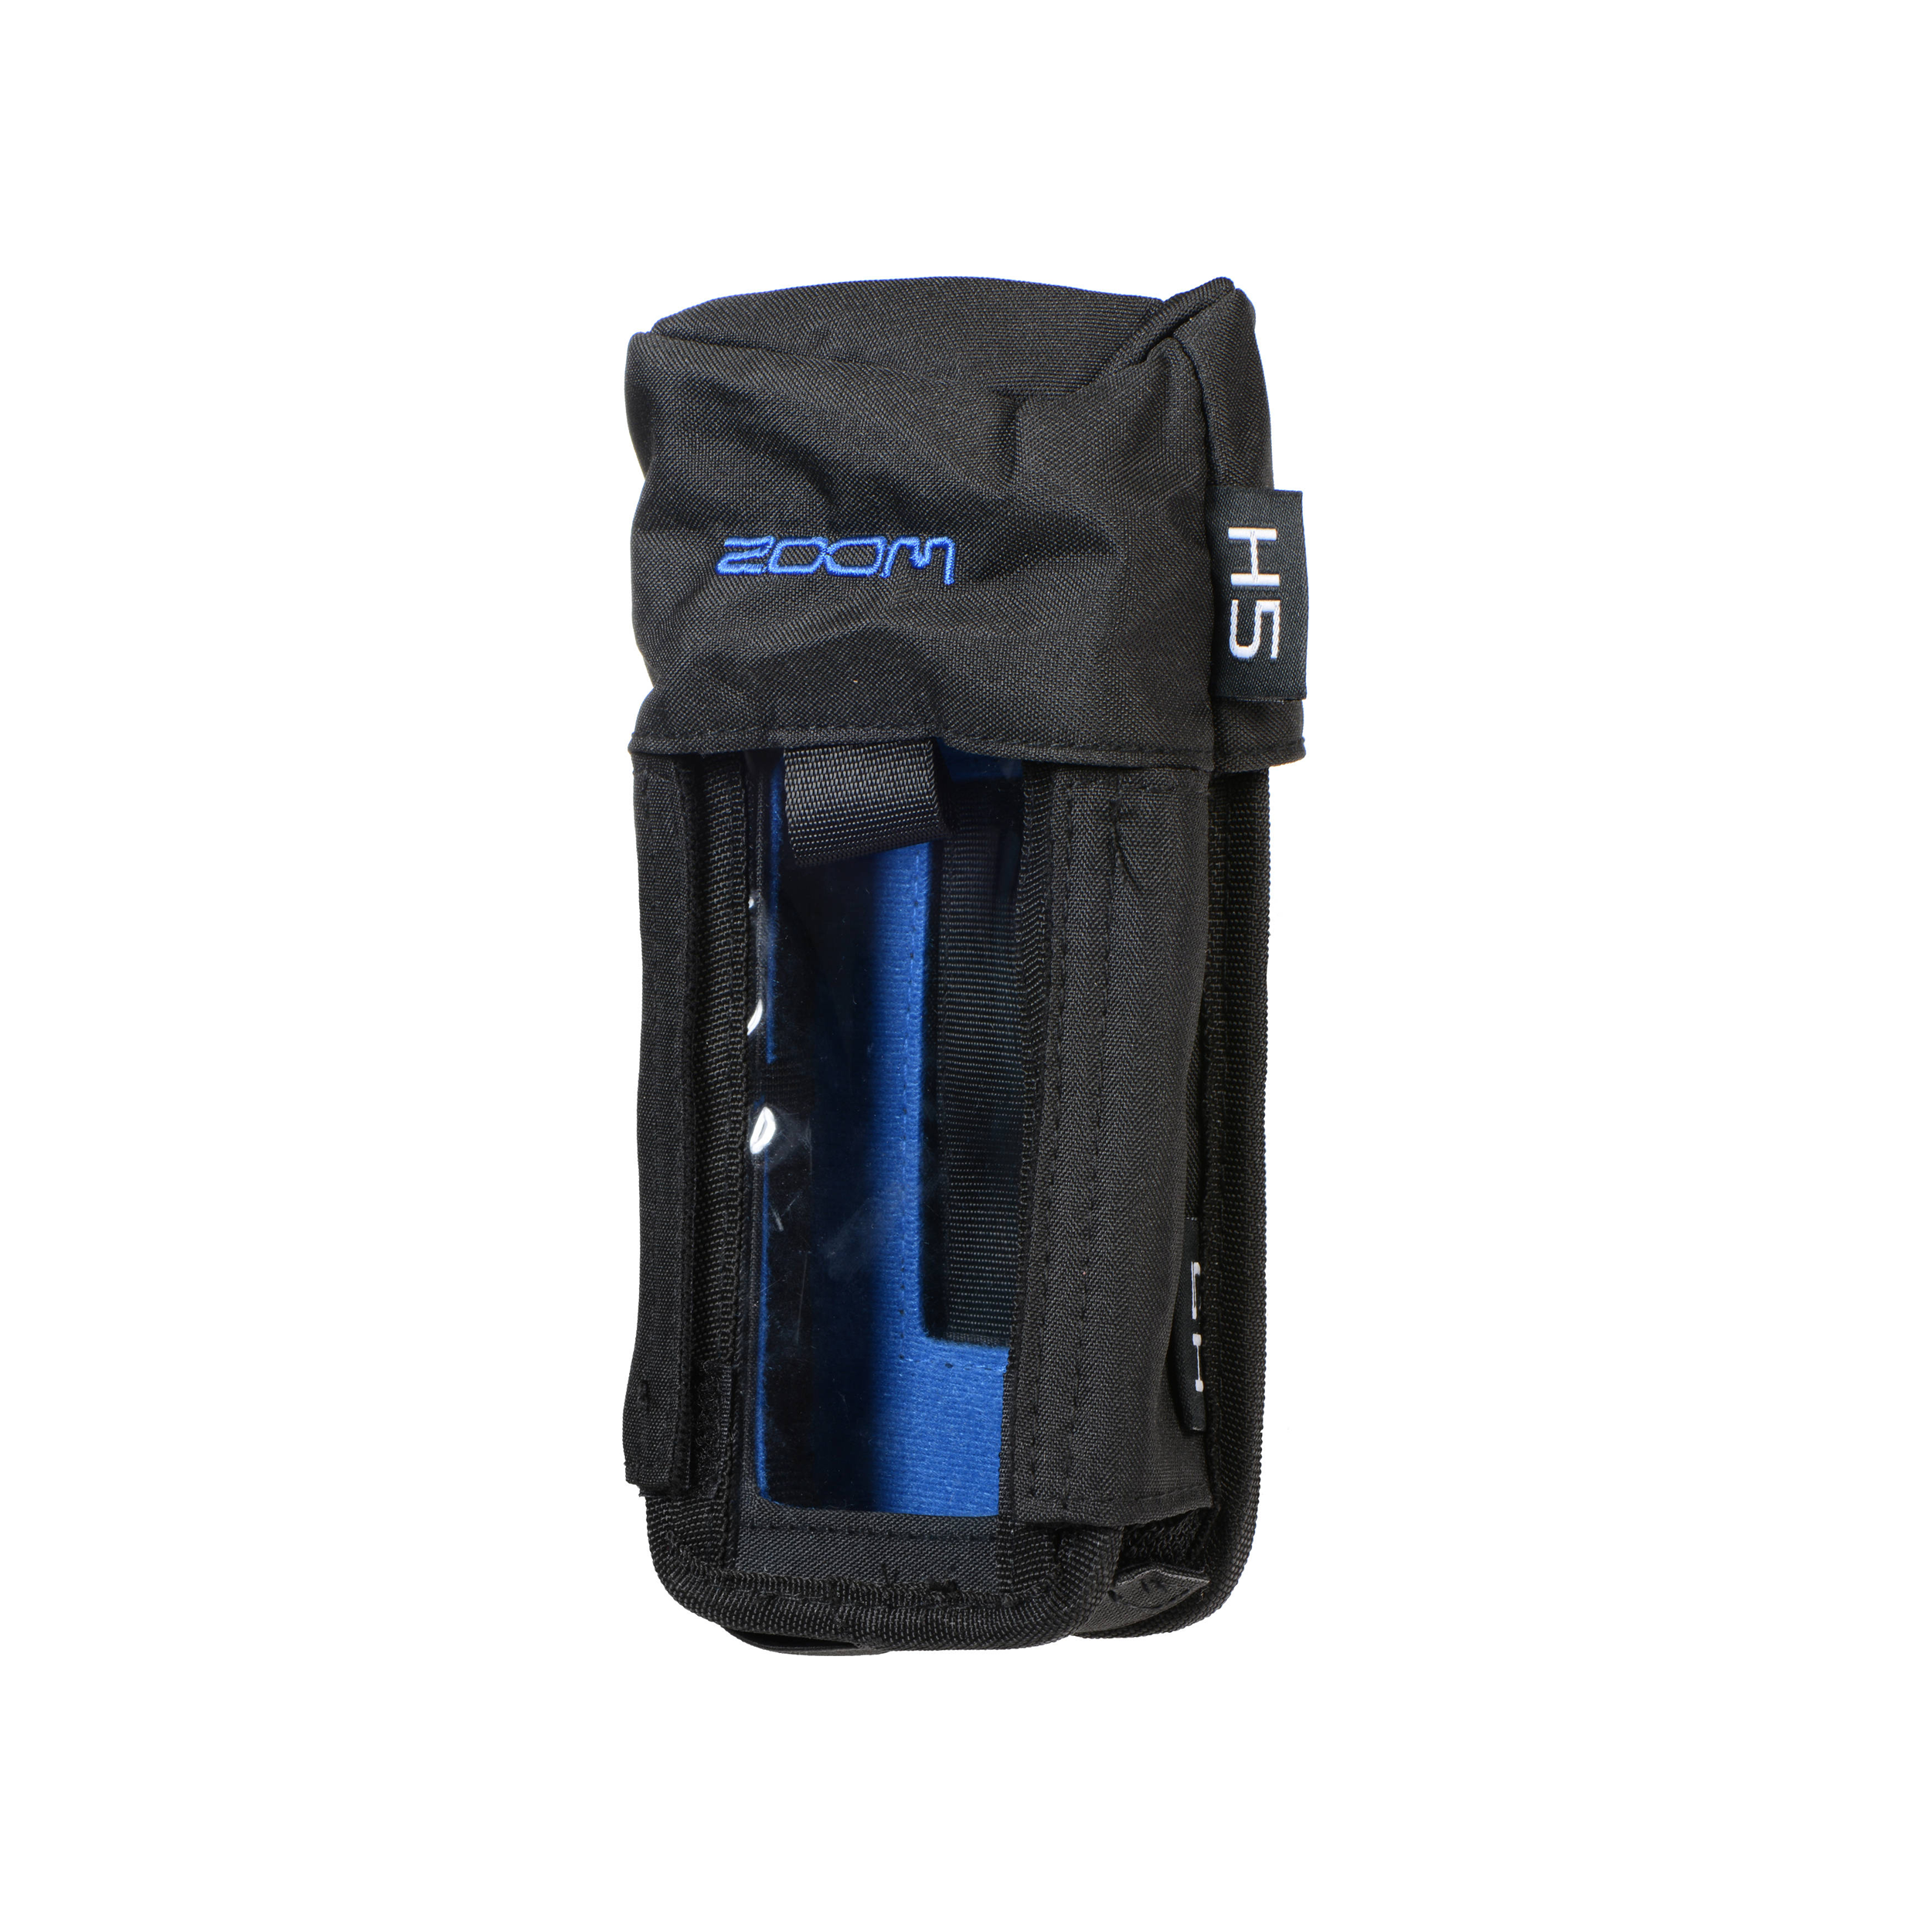 Zoom PCH-5 Protective Case for Zoom H5 Handy Recorder